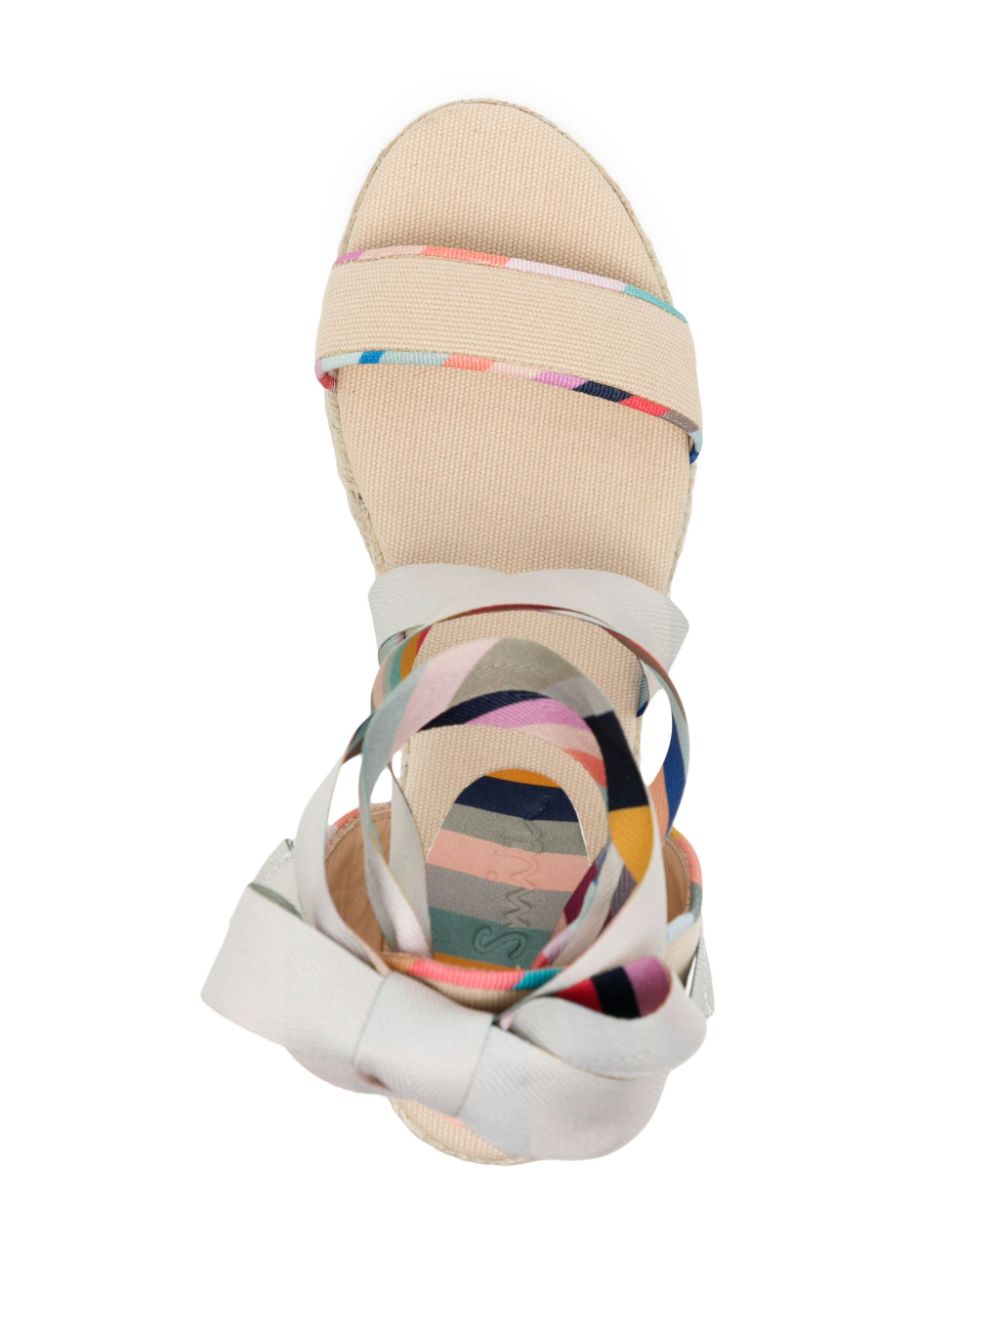 Paul Smith Sandals White